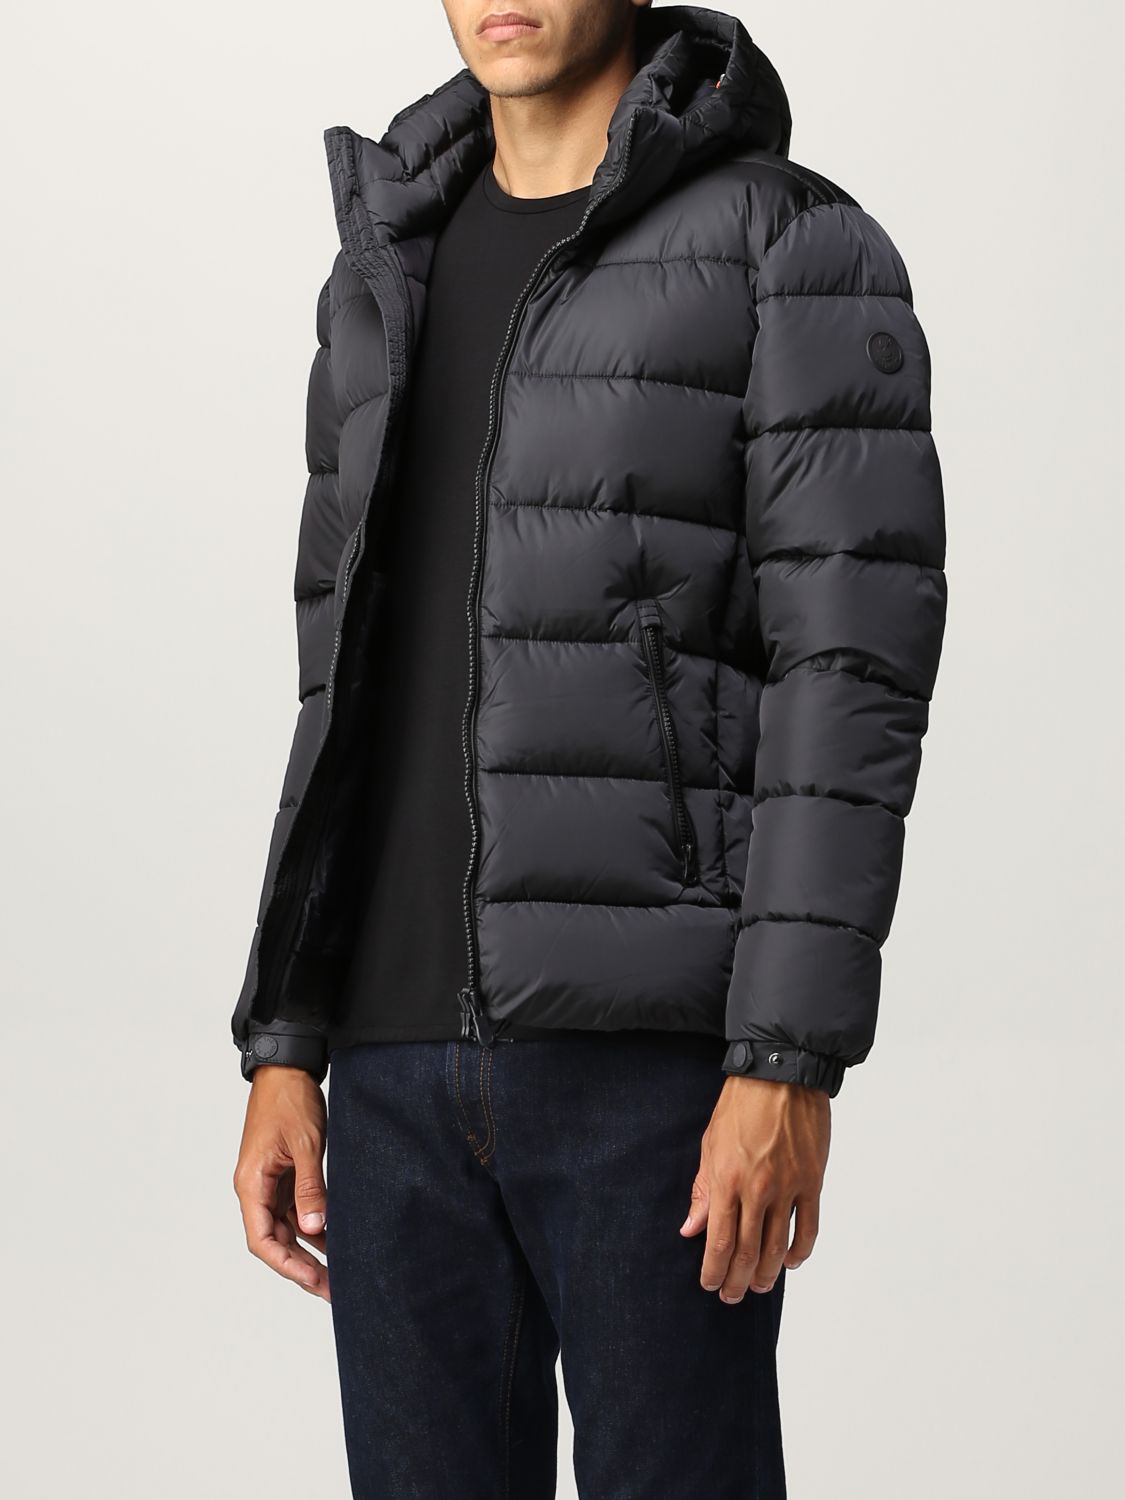 Jacket Save The Duck: Save The Duck jacket for man charcoal 3